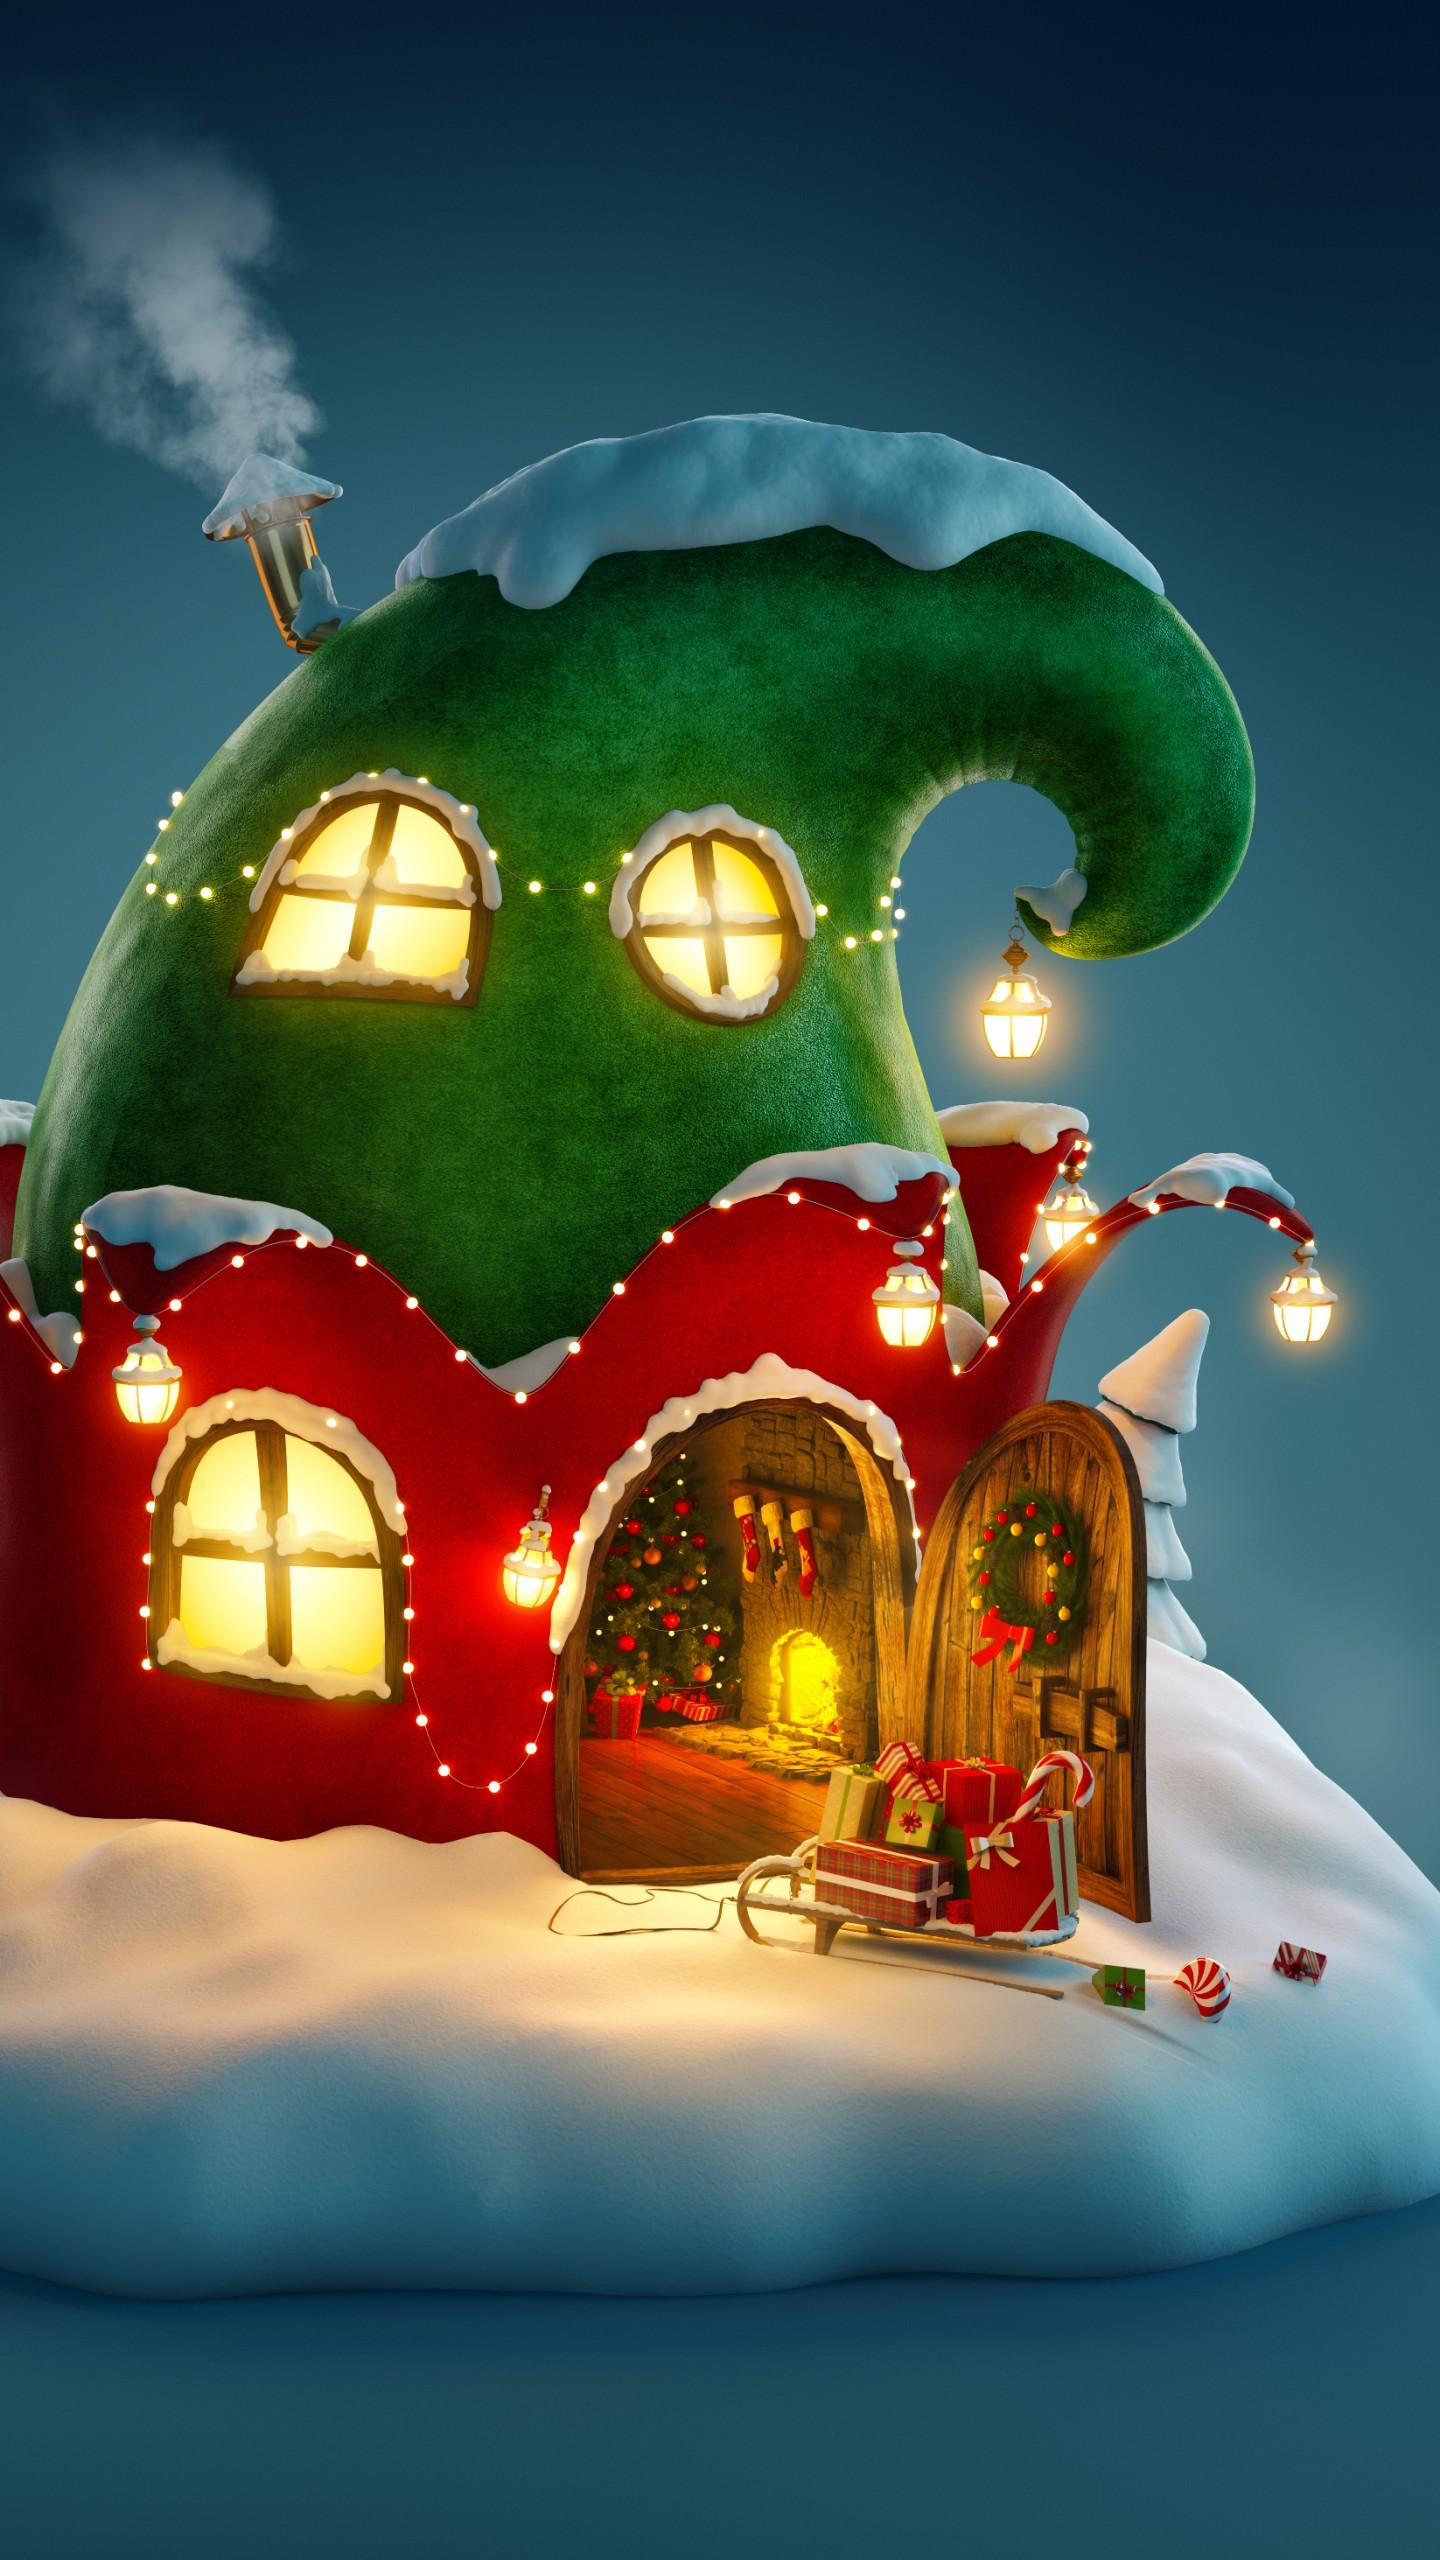 Wallpaper Christmas, New Year, fairy house, Holidays